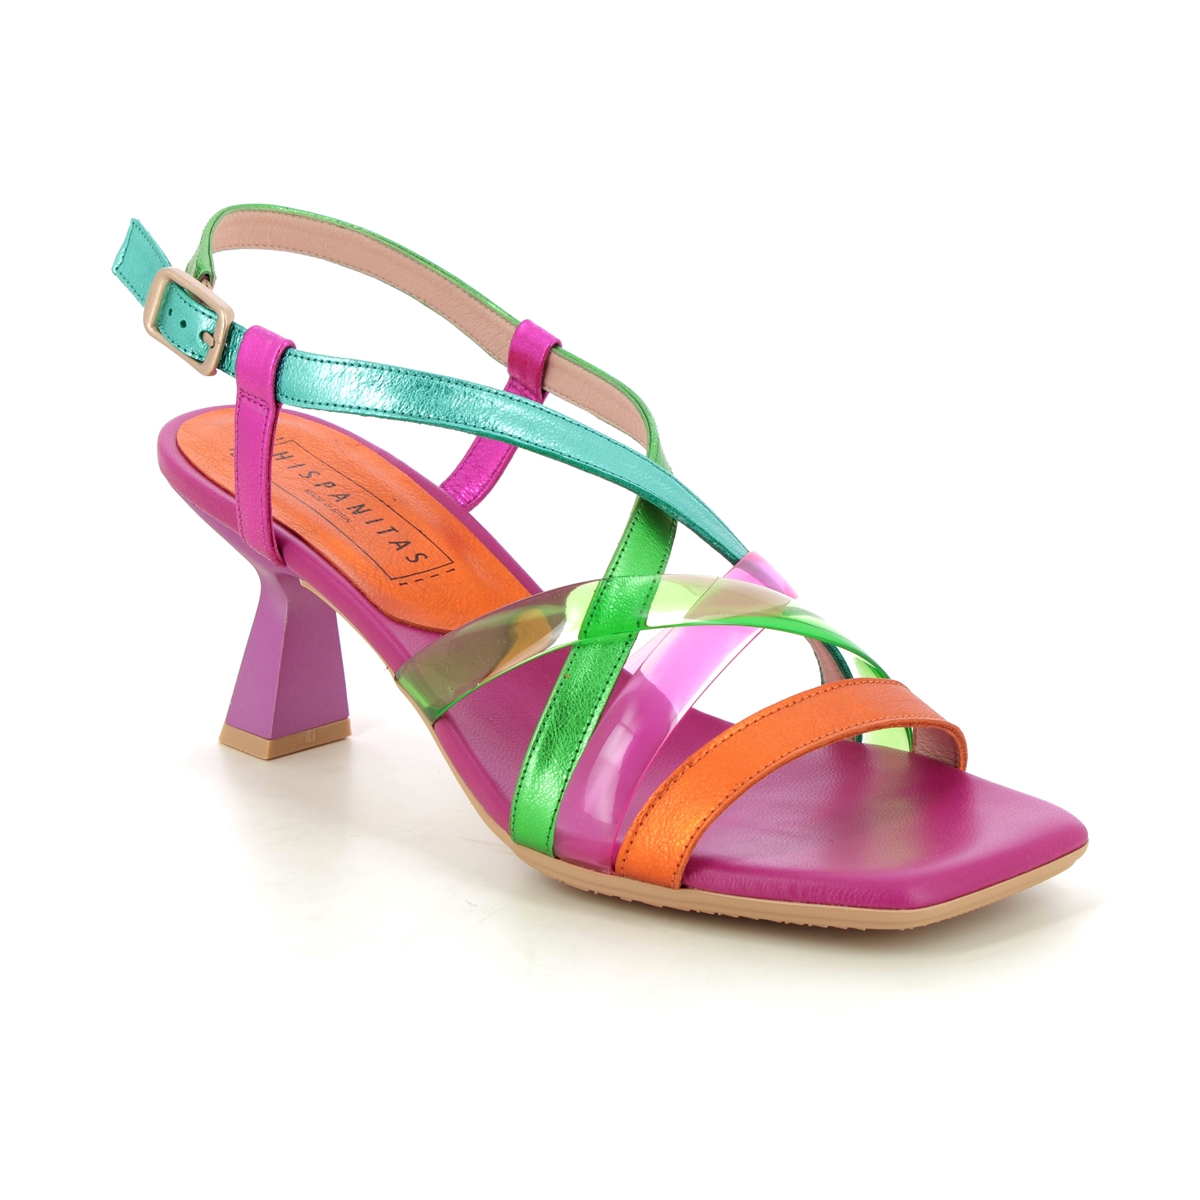 Hispanitas Danielle Multi Coloured Womens Heeled Sandals CHV243292-001 in a Plain Leather in Size 39